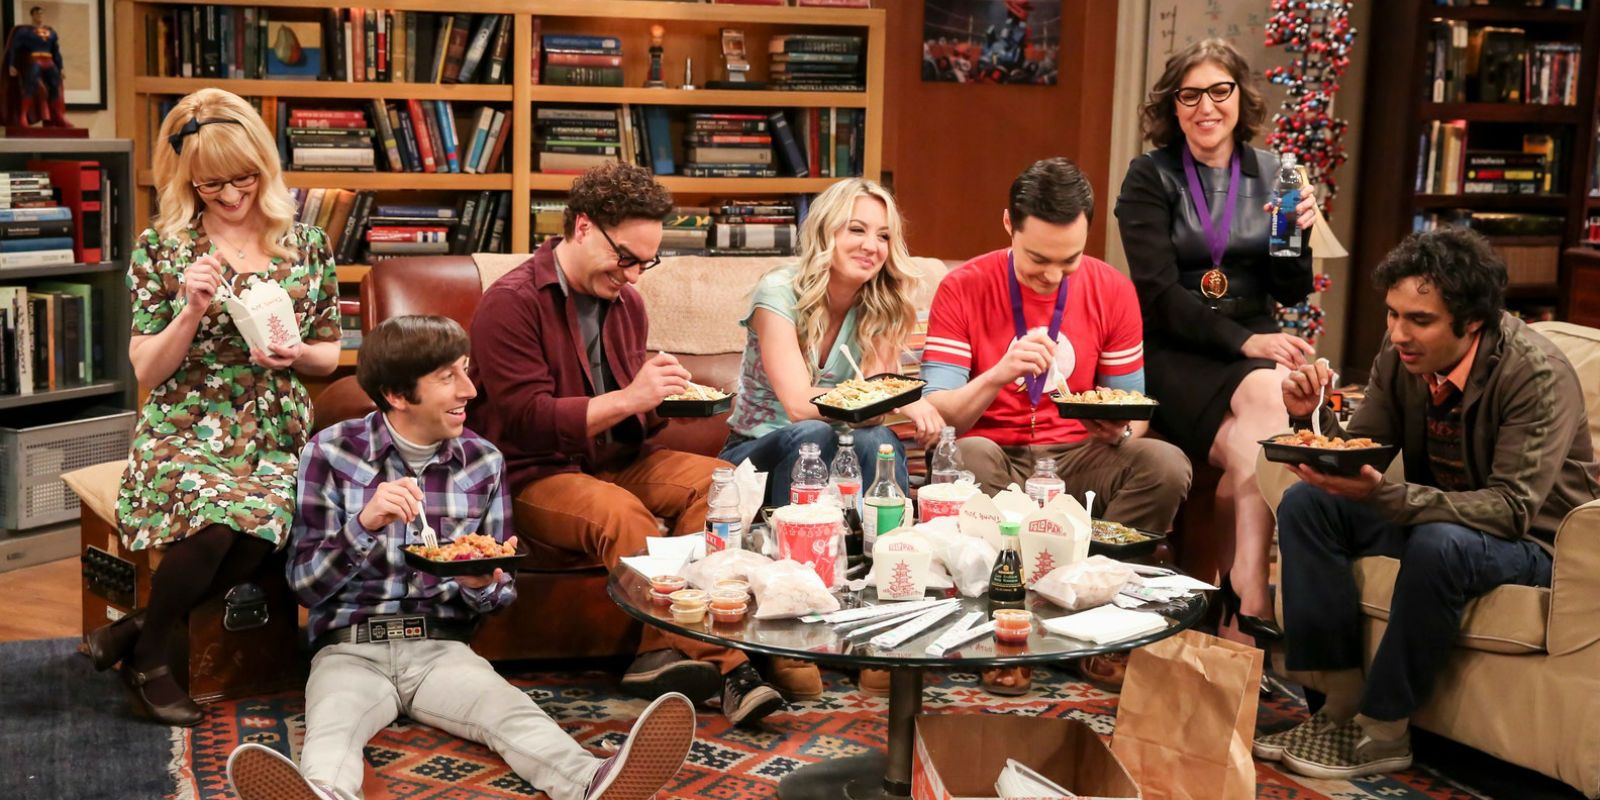 The Big Bang Theory cast eating dinner at home